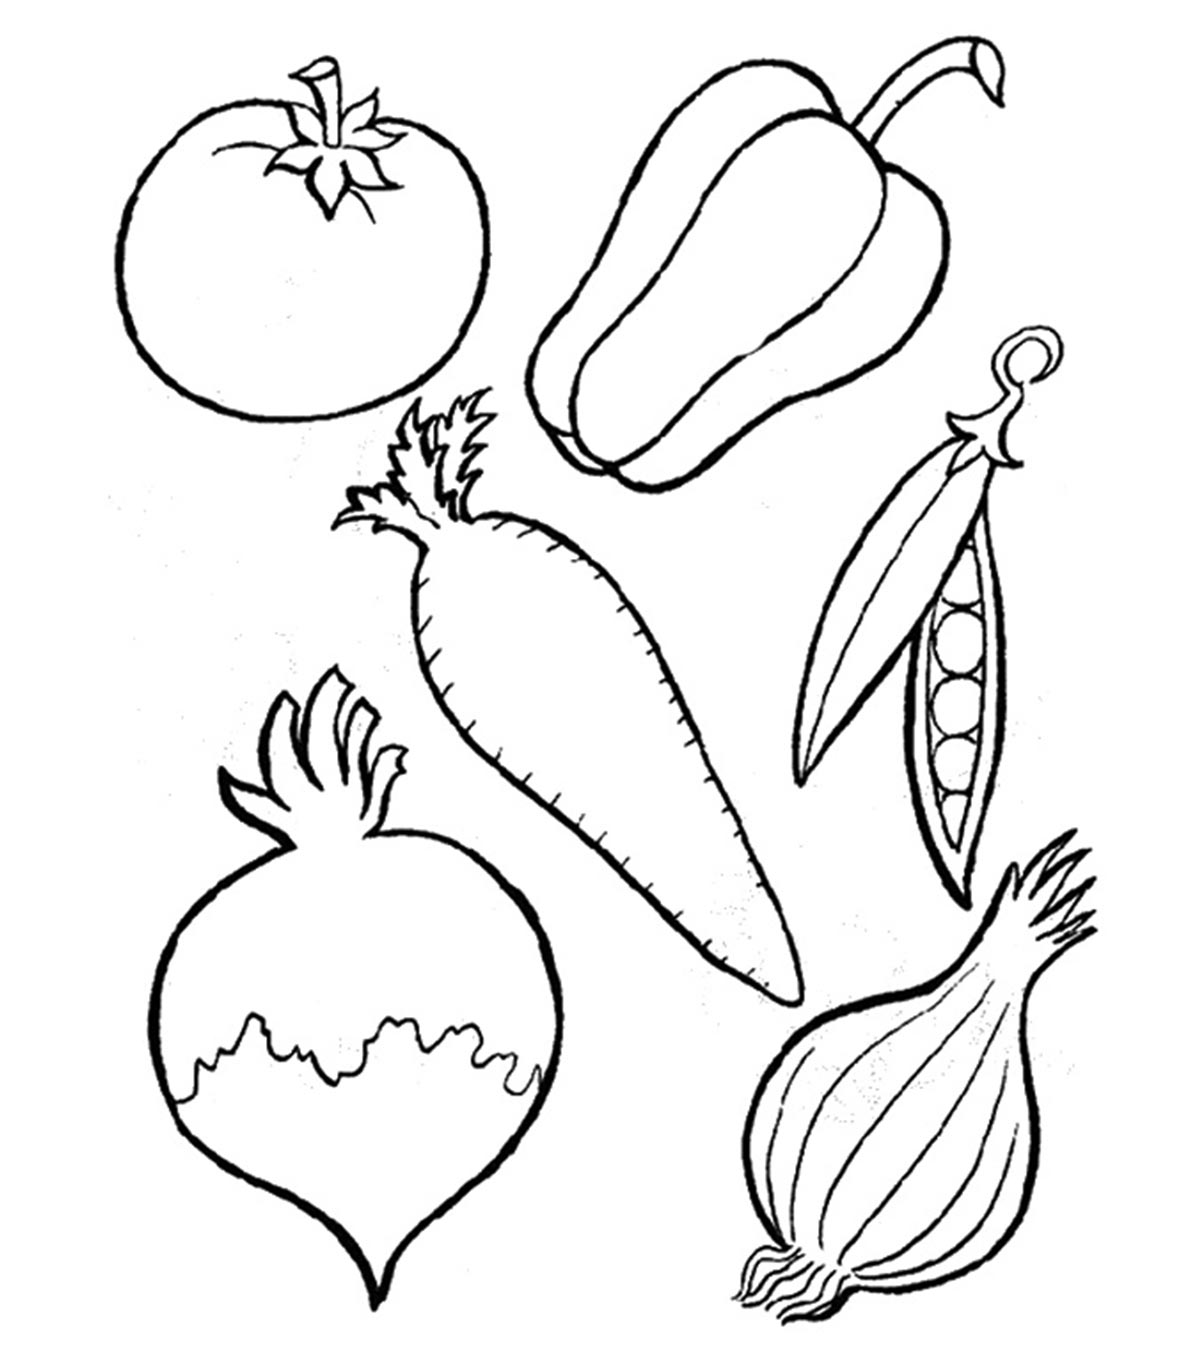 10 Vegetables Coloring Pages For Your Toddler